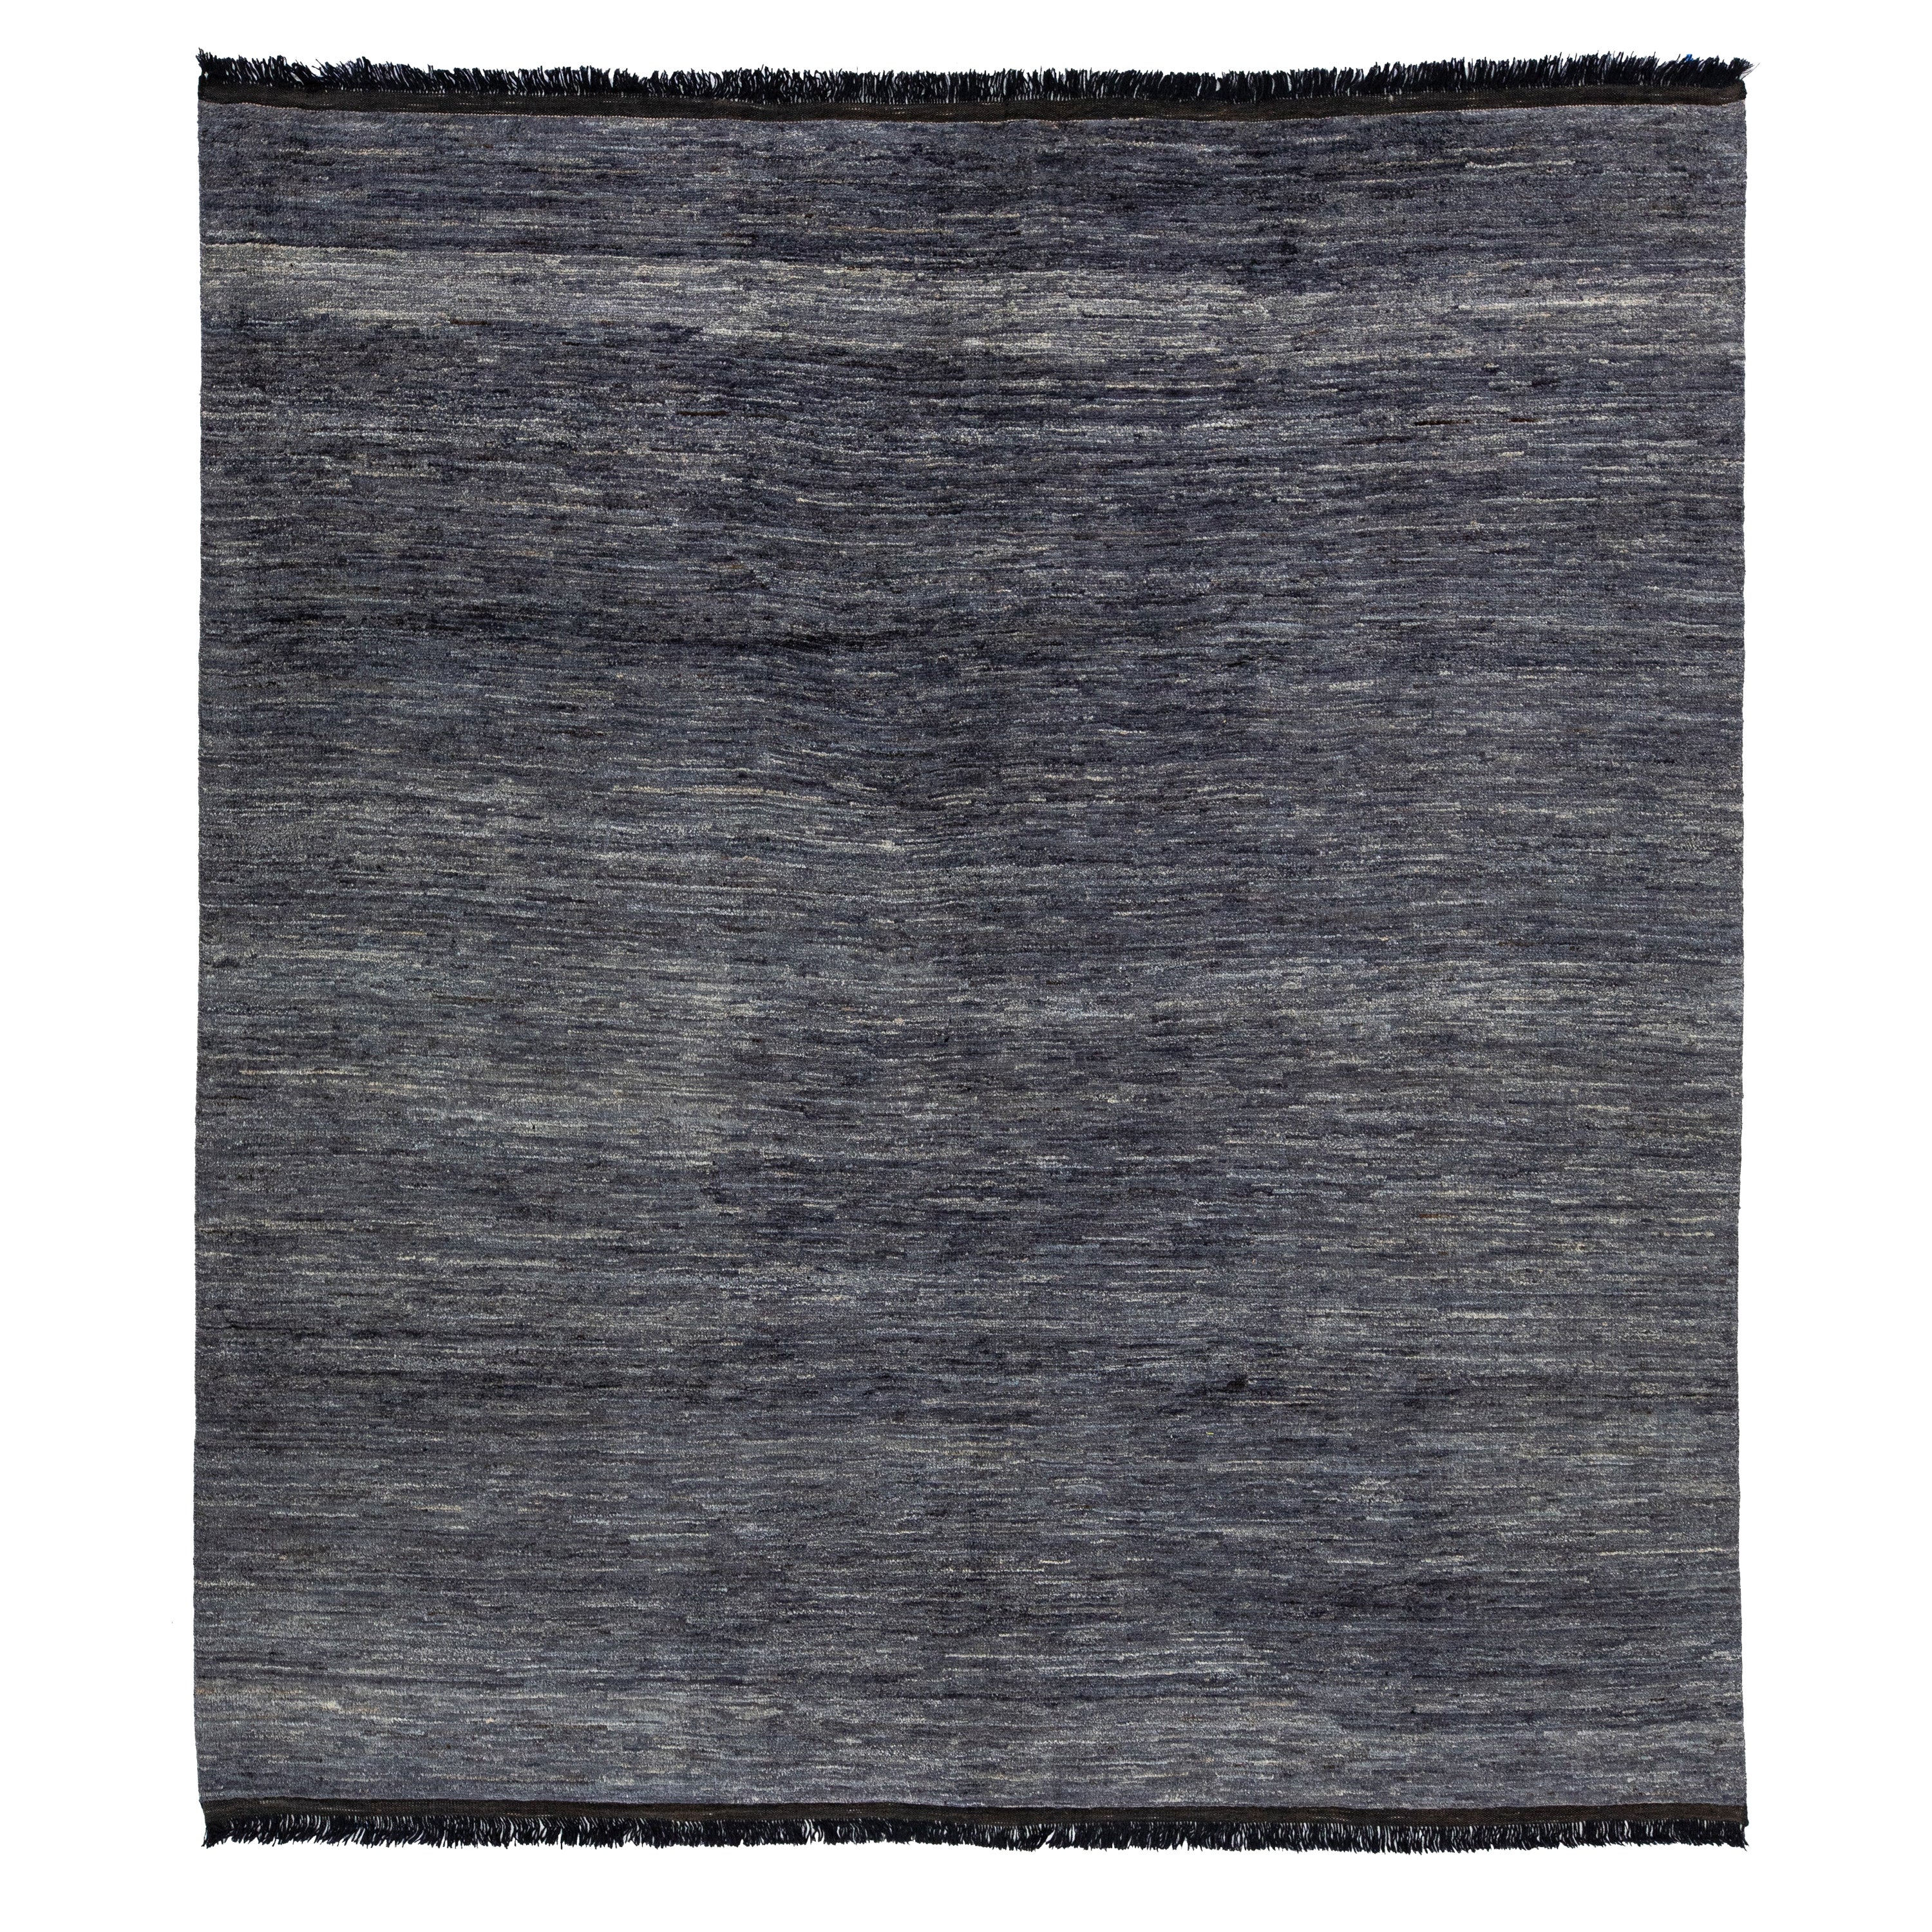 Handmade Contemporary Solid Gabbeh Style Wool Rug In Gray-Charcoal Color